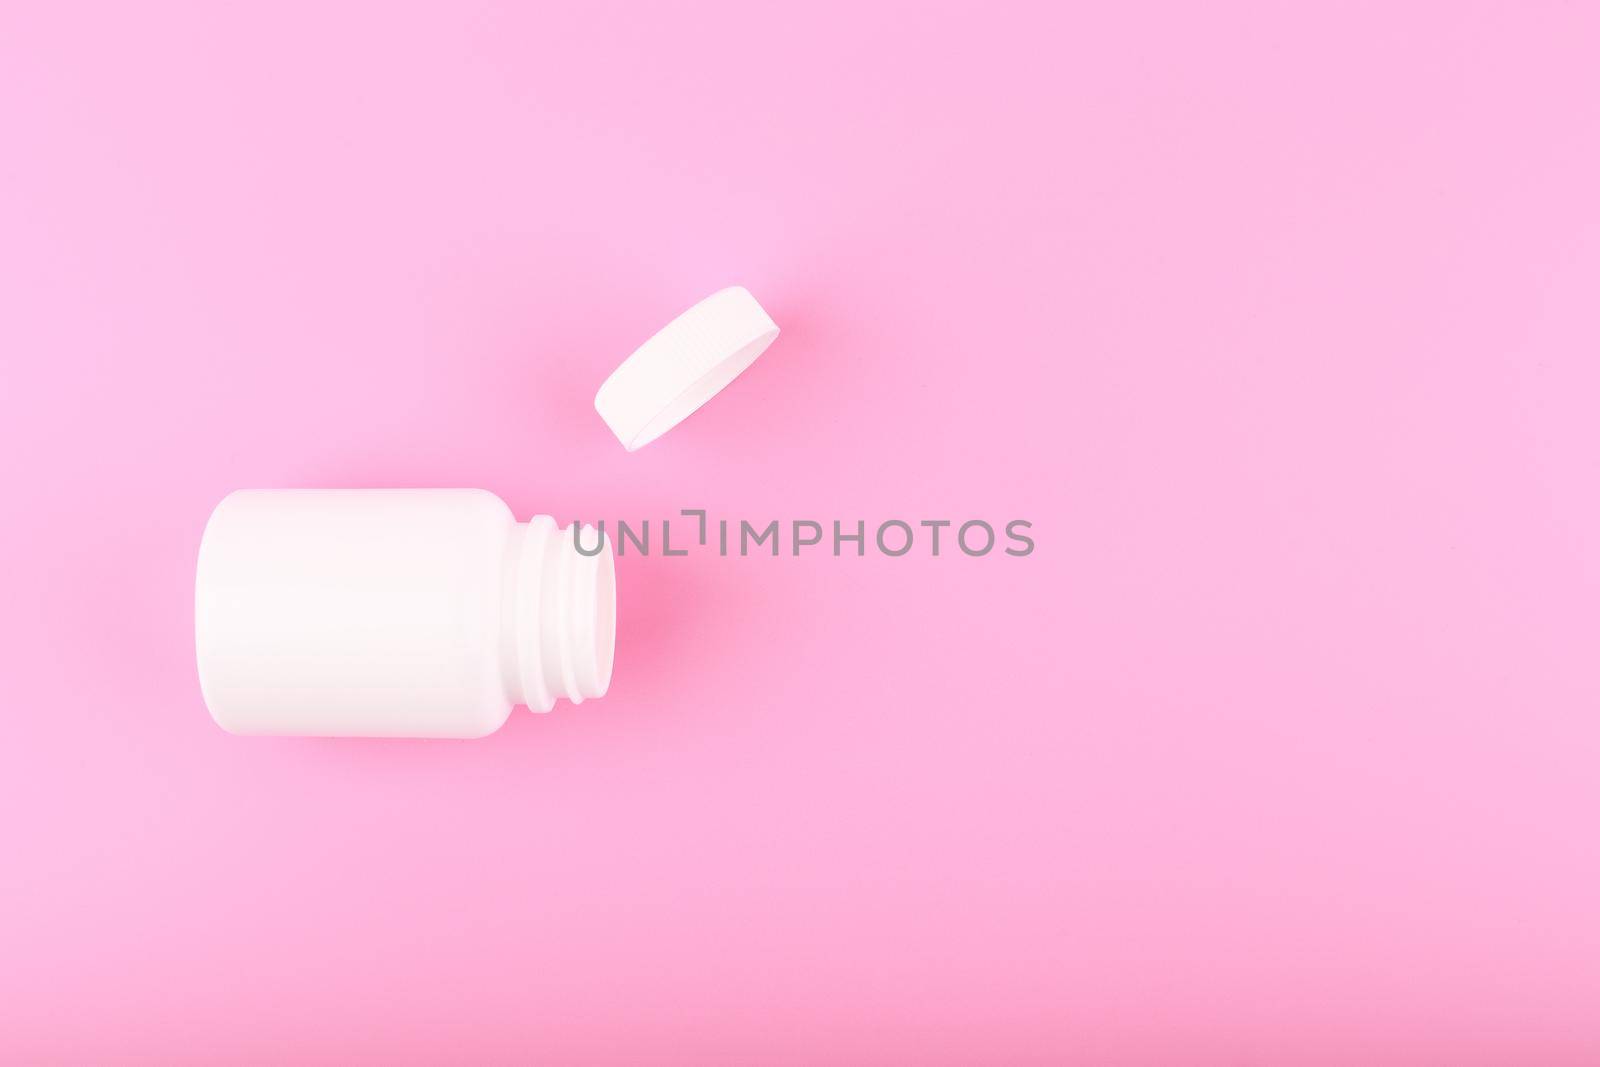 Minimal flat lay with white opened medication bottle on saturated pinkish purple bright background with copy space. Concept of vitamins or supplements